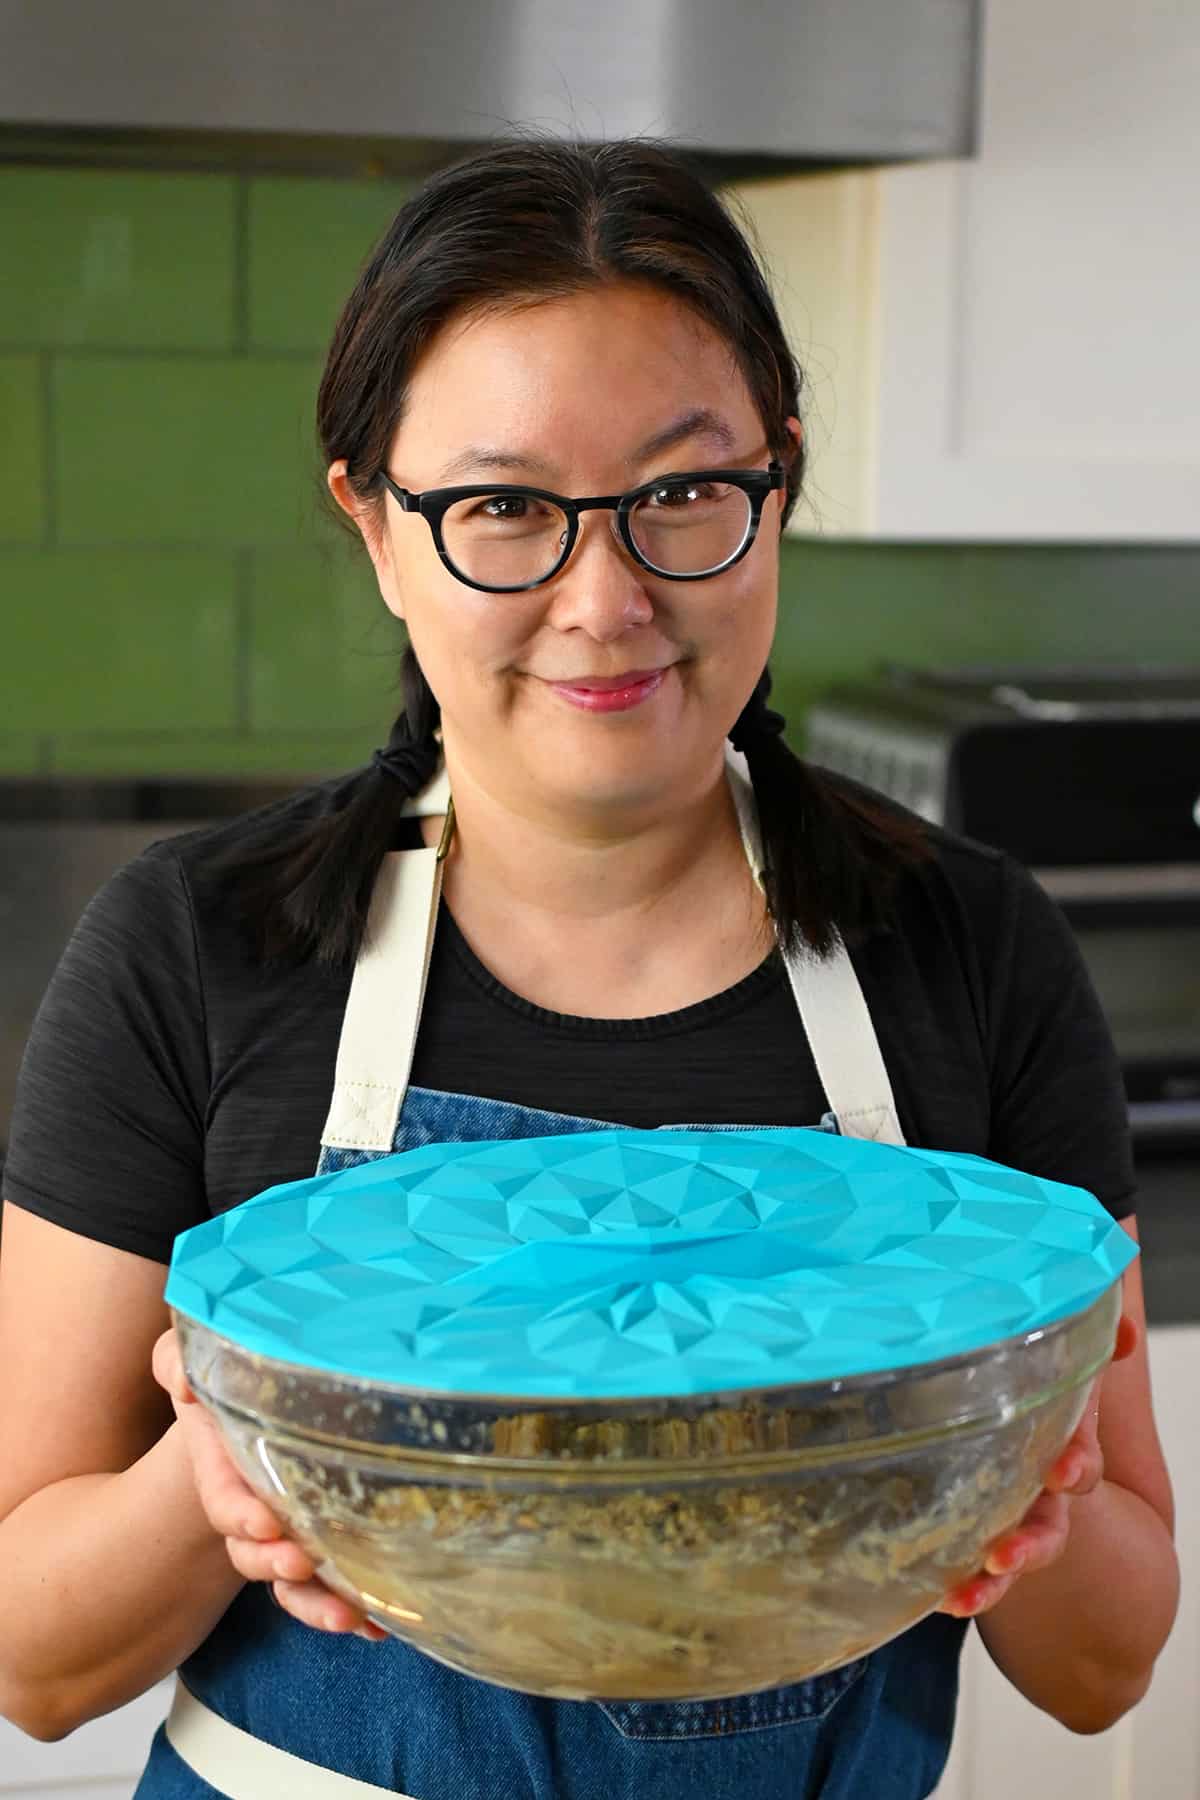 A smiling Asian woman wearing glasses holds a glass bowl full of paleo banana cookie batter covered with a blue silicone lid.